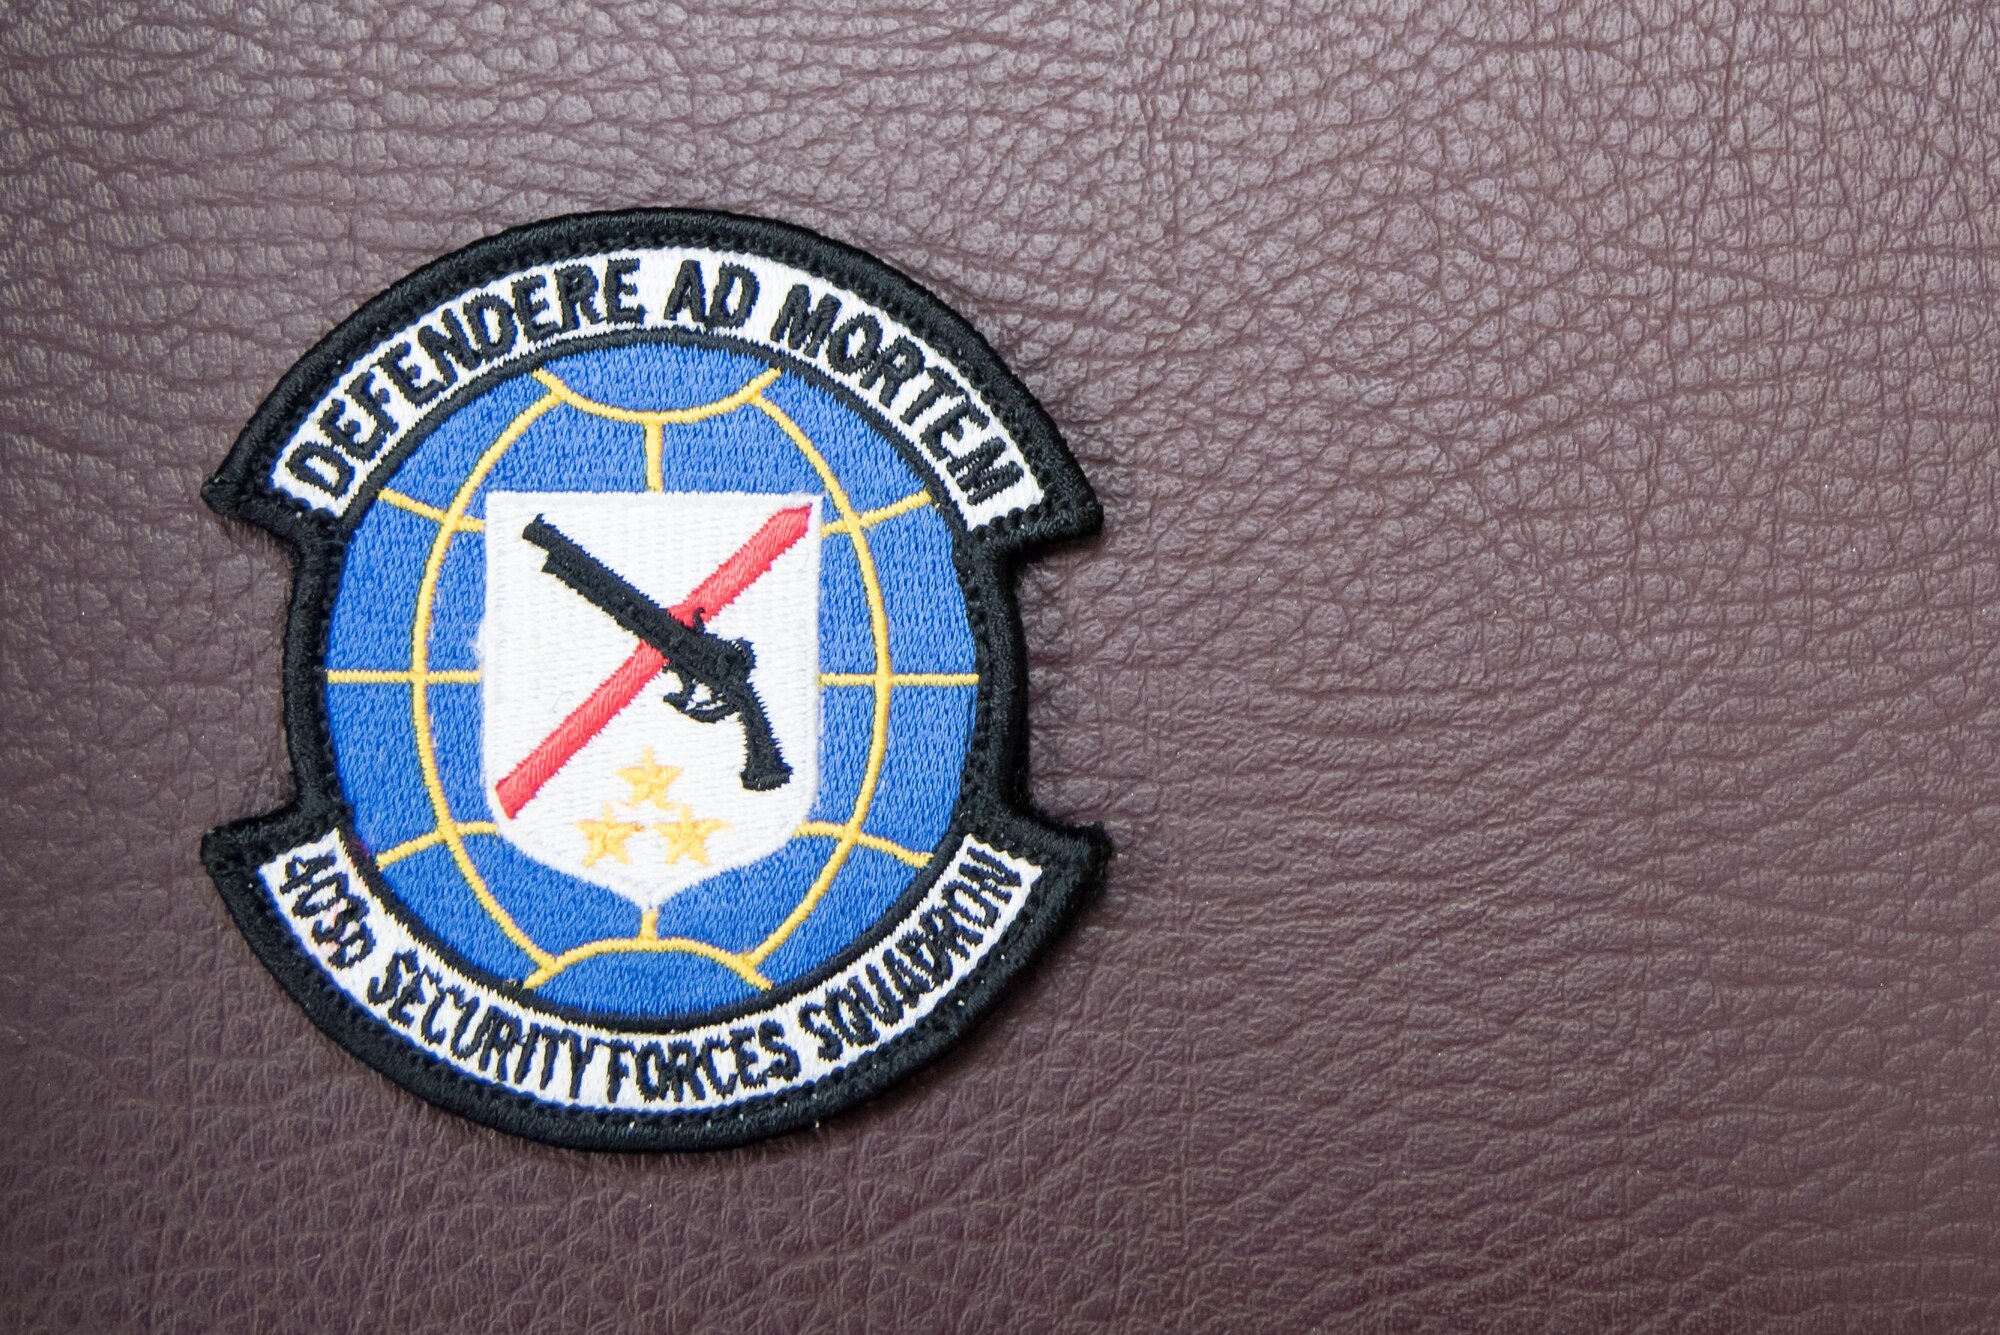 The 403rd Security Forces Squadron unit patch rests on a chair at Keesler Air Force Base, Mississippi Nov. 7, 2017. (U.S. Air Force photo by Staff Sgt. Heather Heiney)